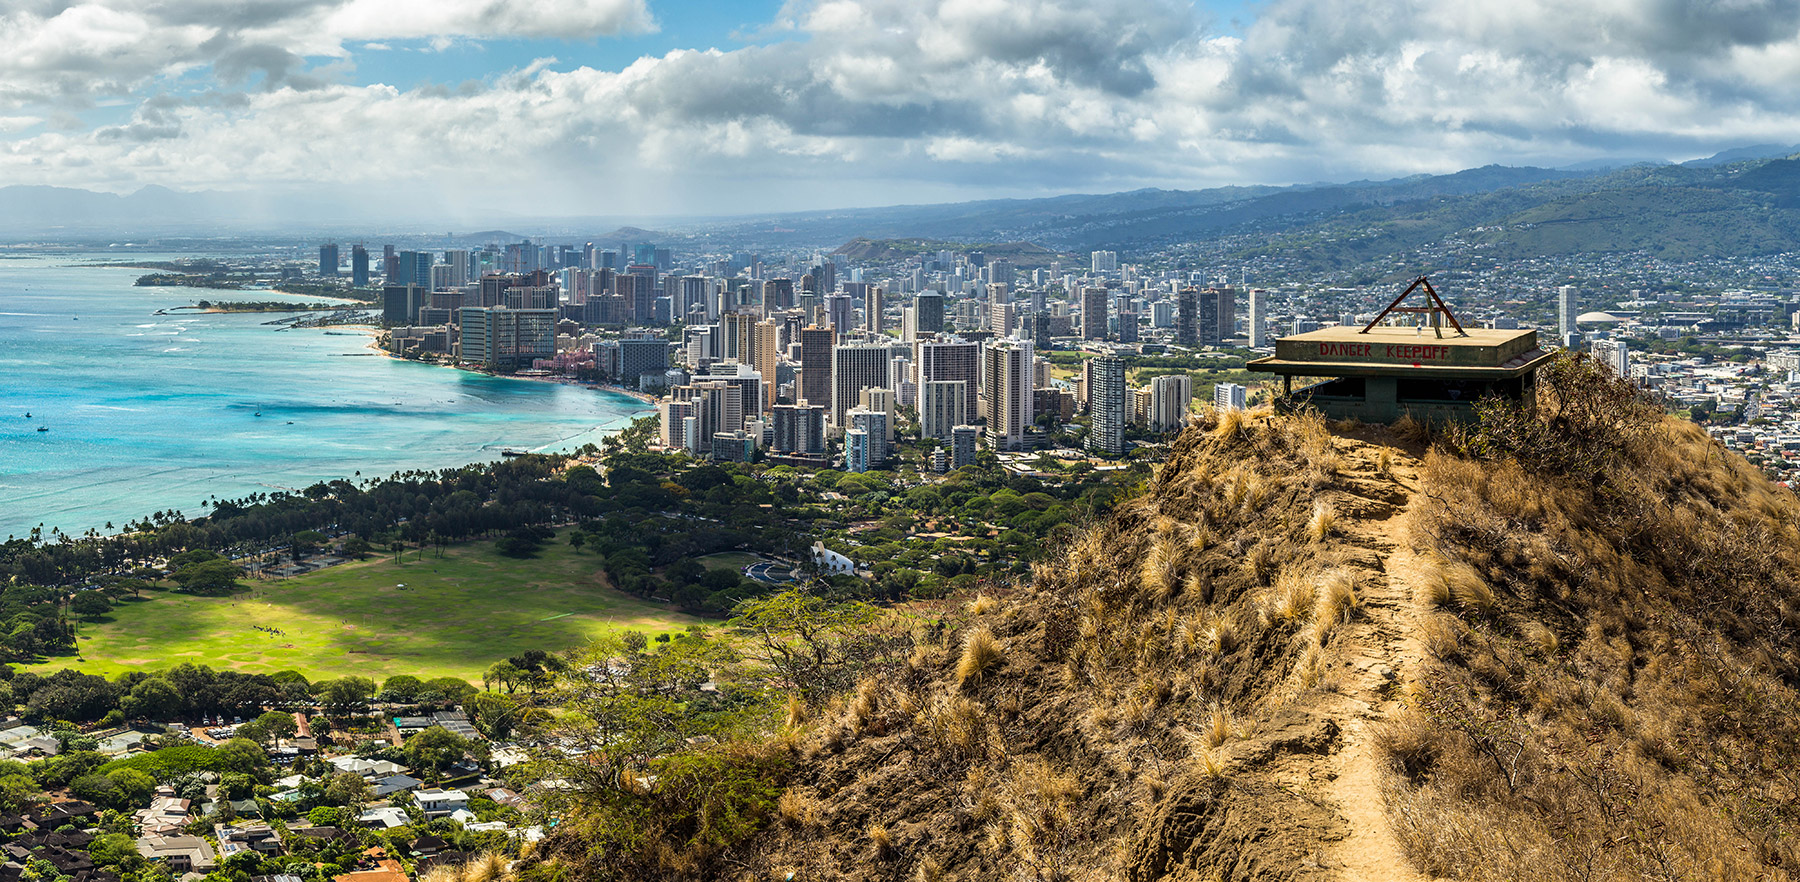 Building A Digital Product Business In Hawaii